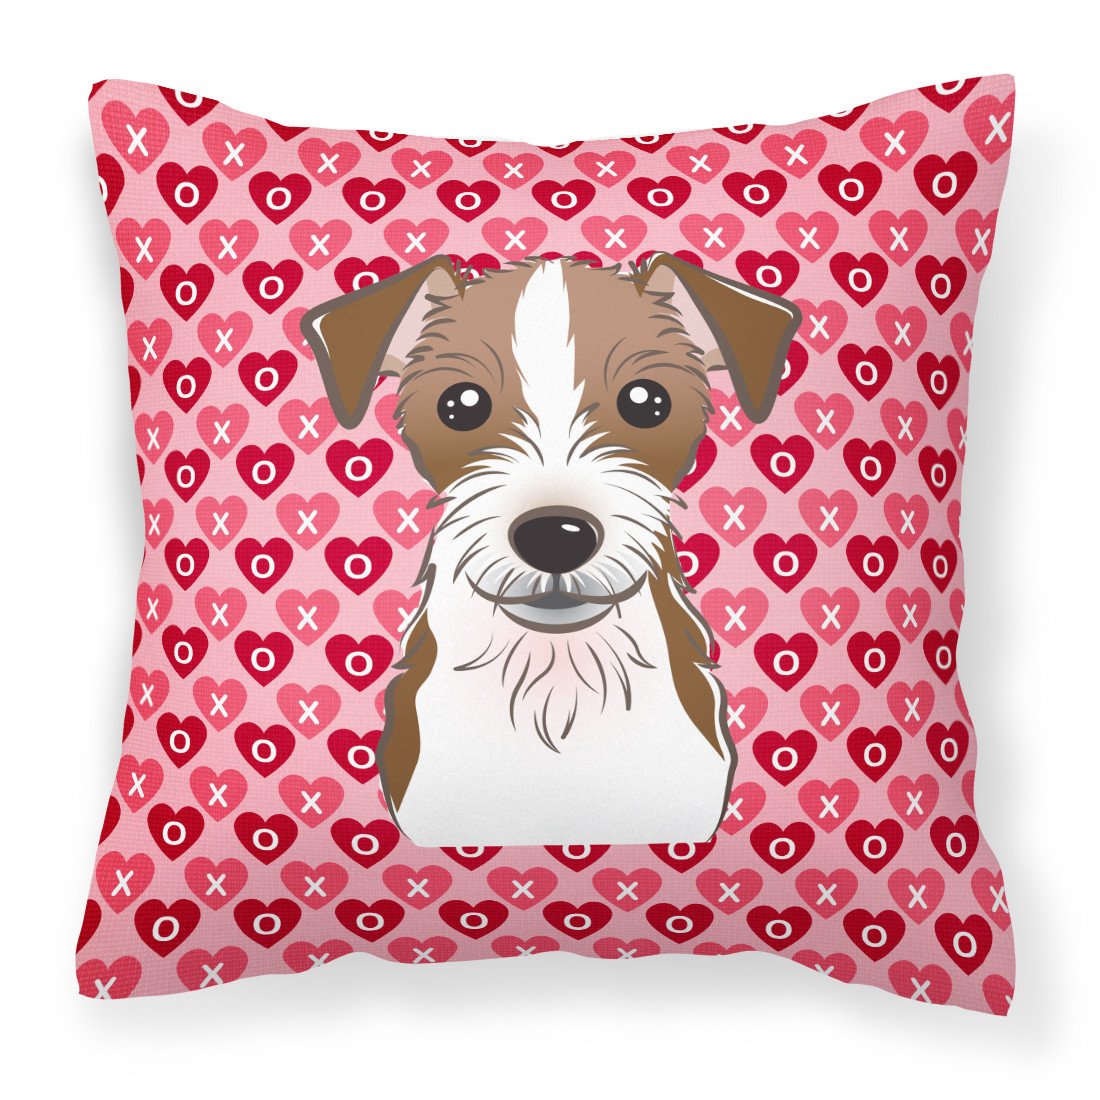 Jack Russell Terrier Hearts Fabric Decorative Pillow BB5272PW1818 by Caroline's Treasures